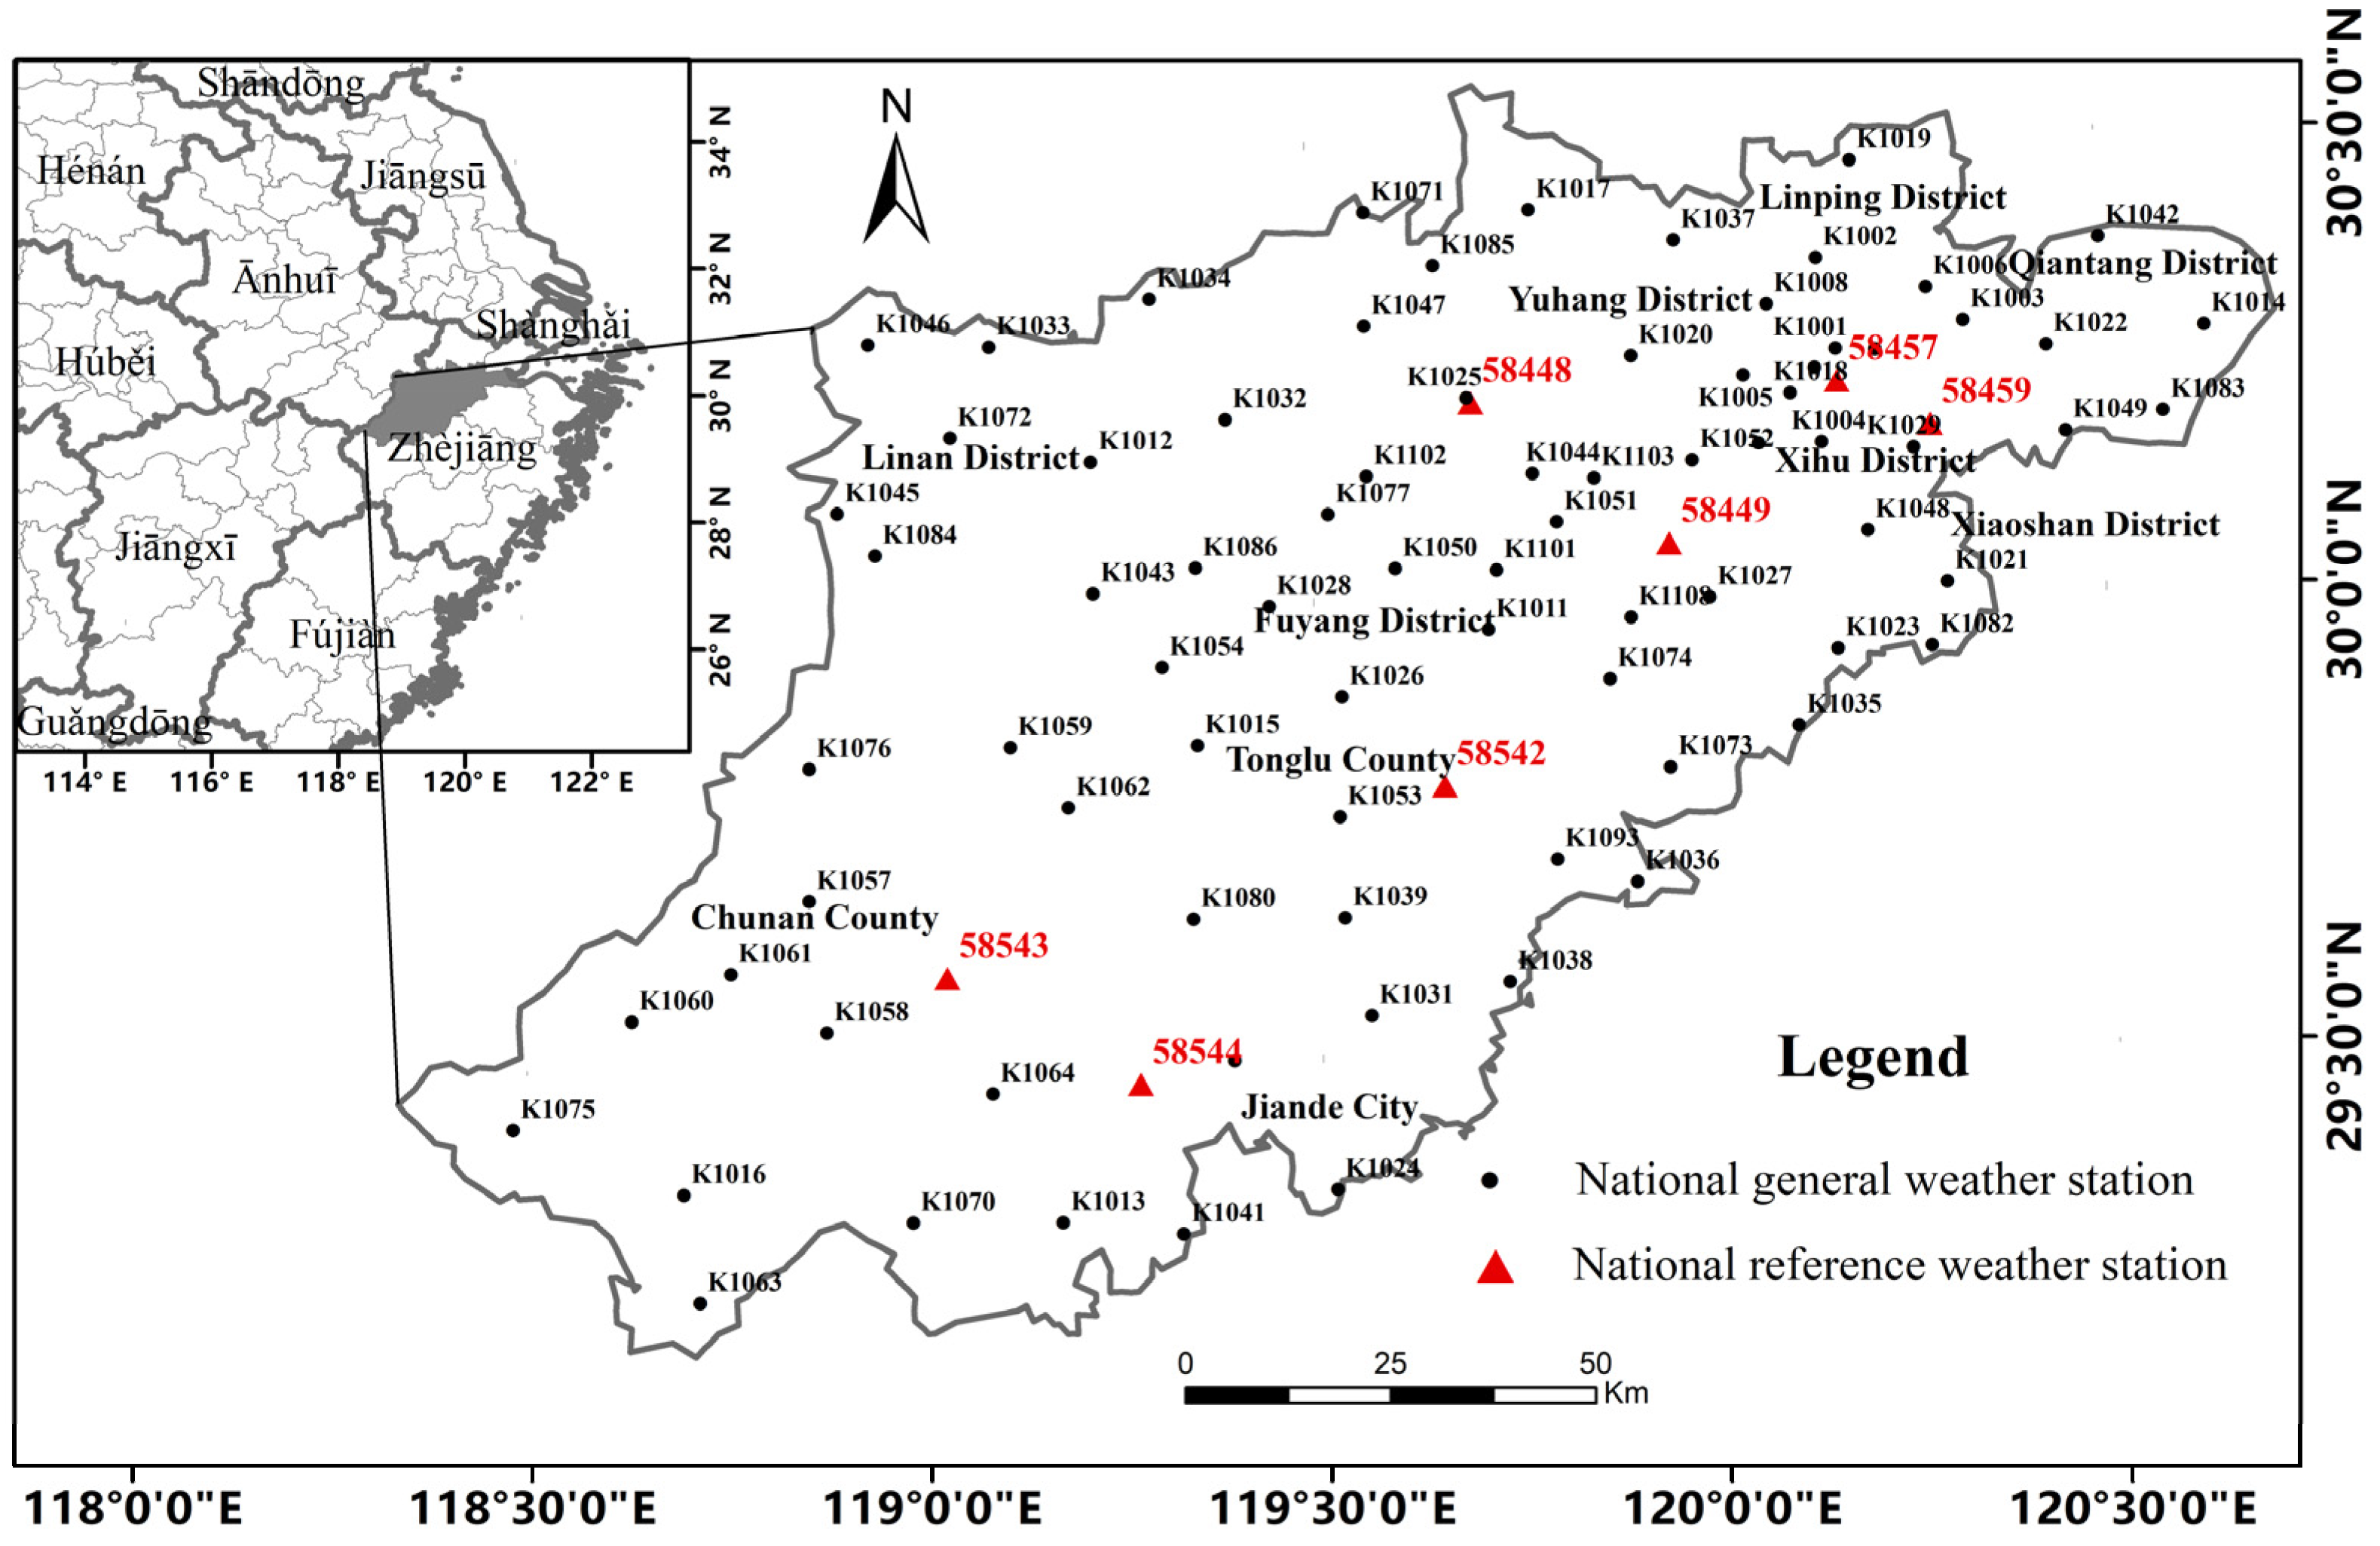 Agriculture | Free Full-Text | Risk Assessment and Application of Tea Hazard in Hangzhou City Based on the Random Forest Algorithm